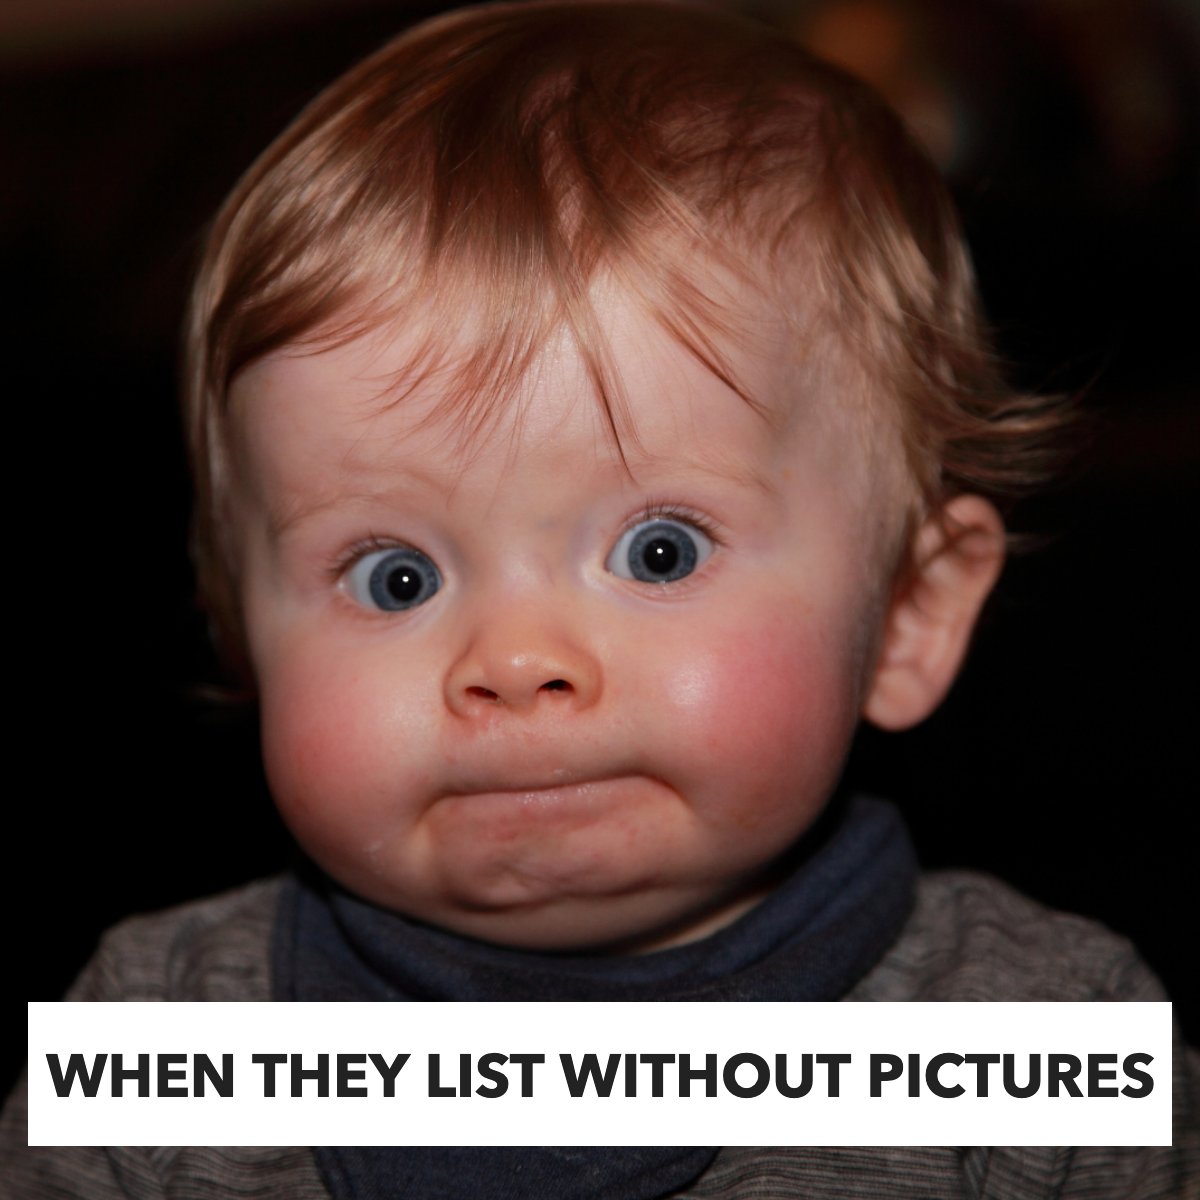 Pics or it's not happening! 🚫 🙅

#awkward #meme #silly #listing #funnyface #baby
 #realtor #northport #northportfl #movingtonorthpotflorida #sarasotarealestate #whatsmyhomeworth #movingtoflorida #northportflorida #sellersagent #sellmyhomefast #homevalue